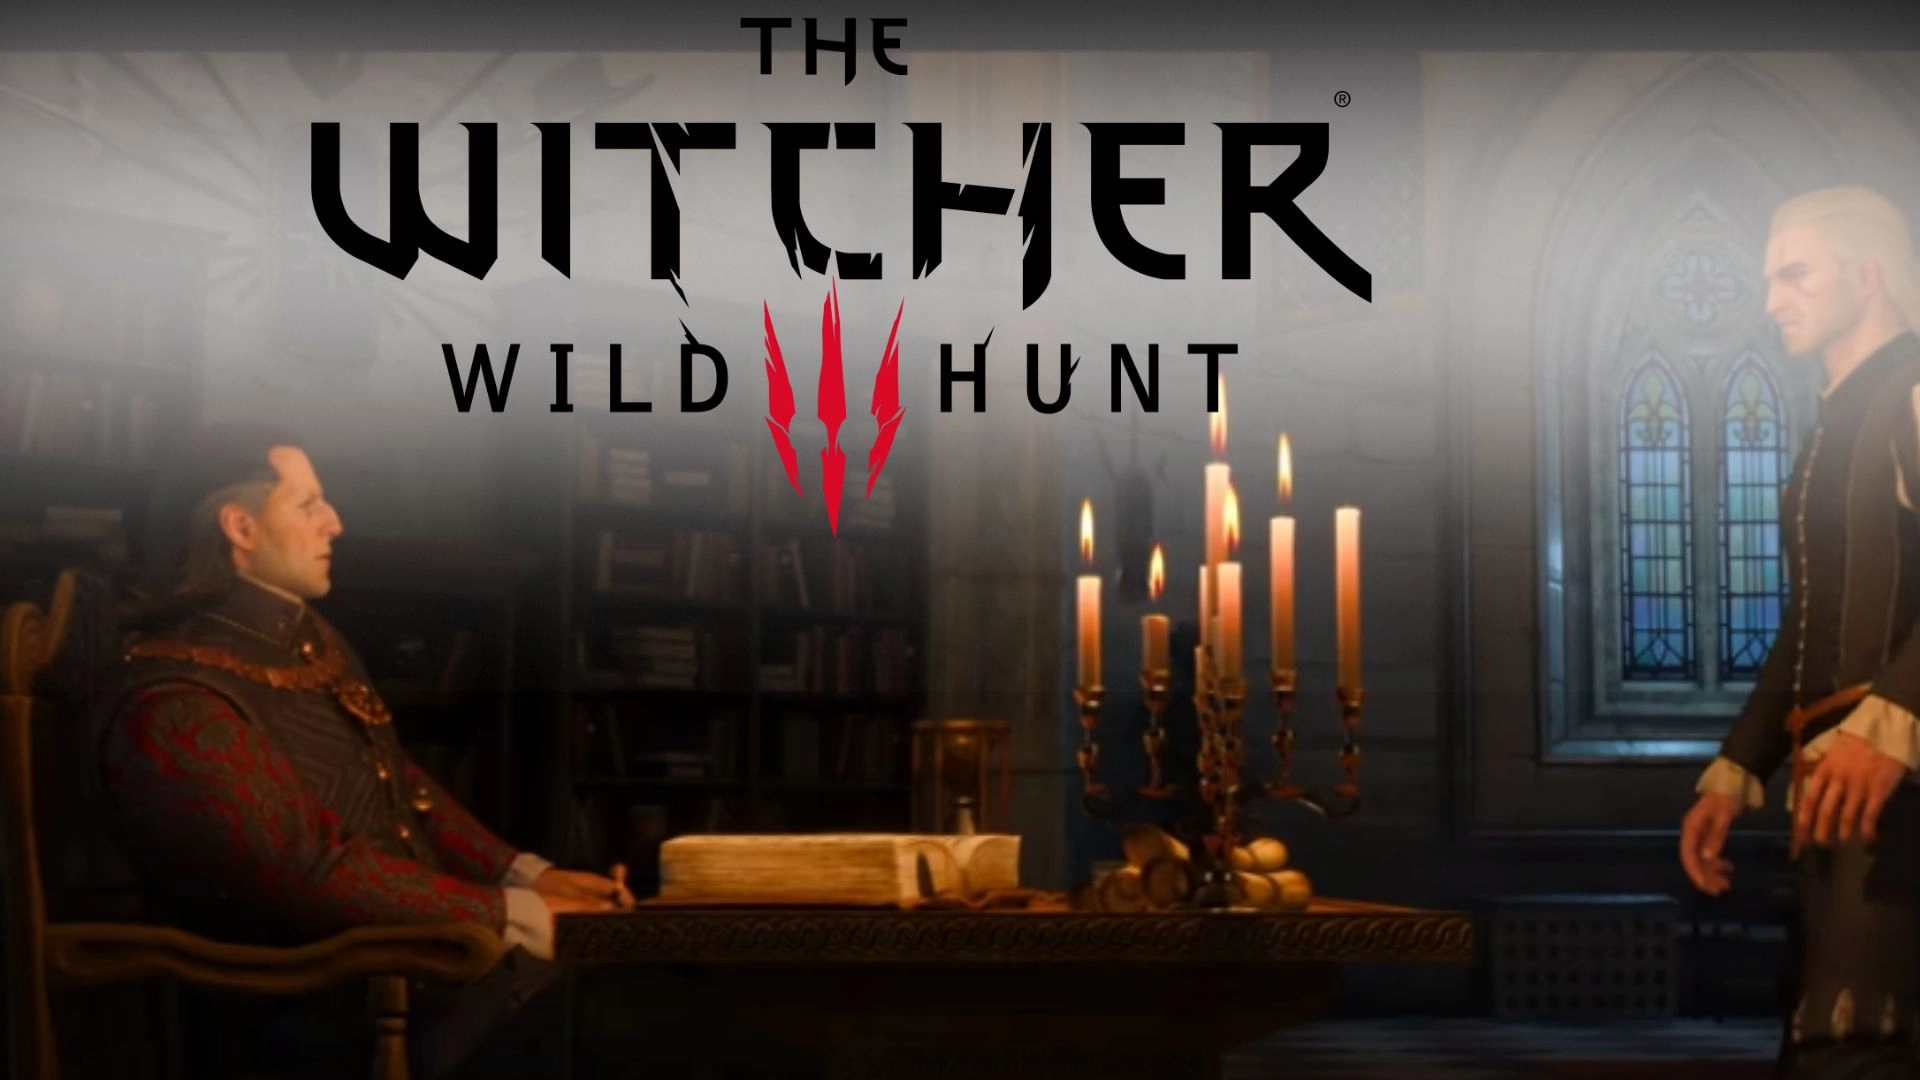 The Witcher 3: Wild Hunt Parents Guide and Age Rating (2022)